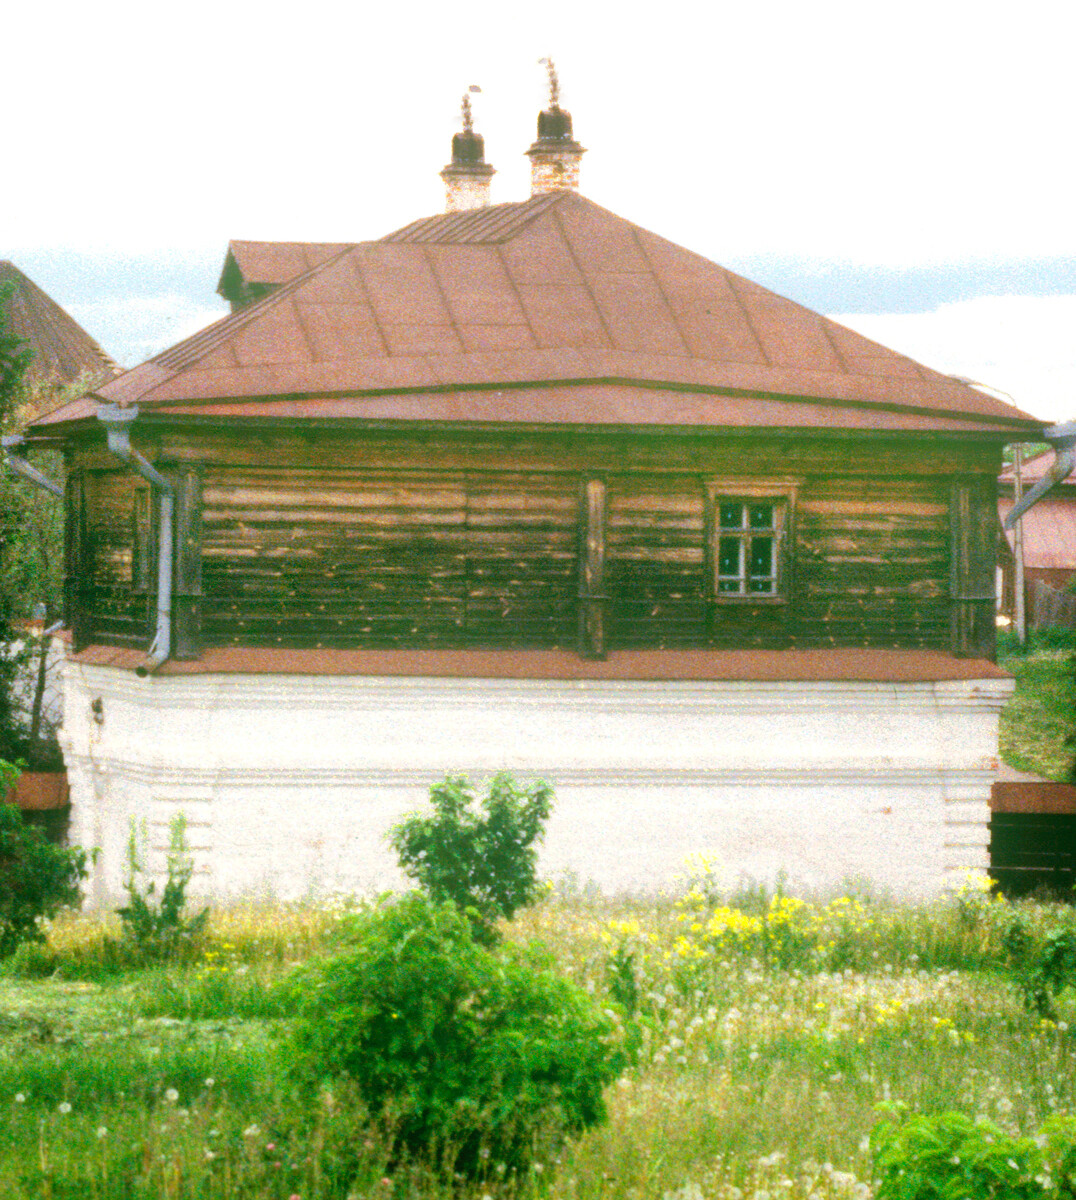 House of Agapov merchant family. Log structure built on brick lower level (18th-century). Part of the Suzdal Museum, the house is on its original site. May 16, 1990